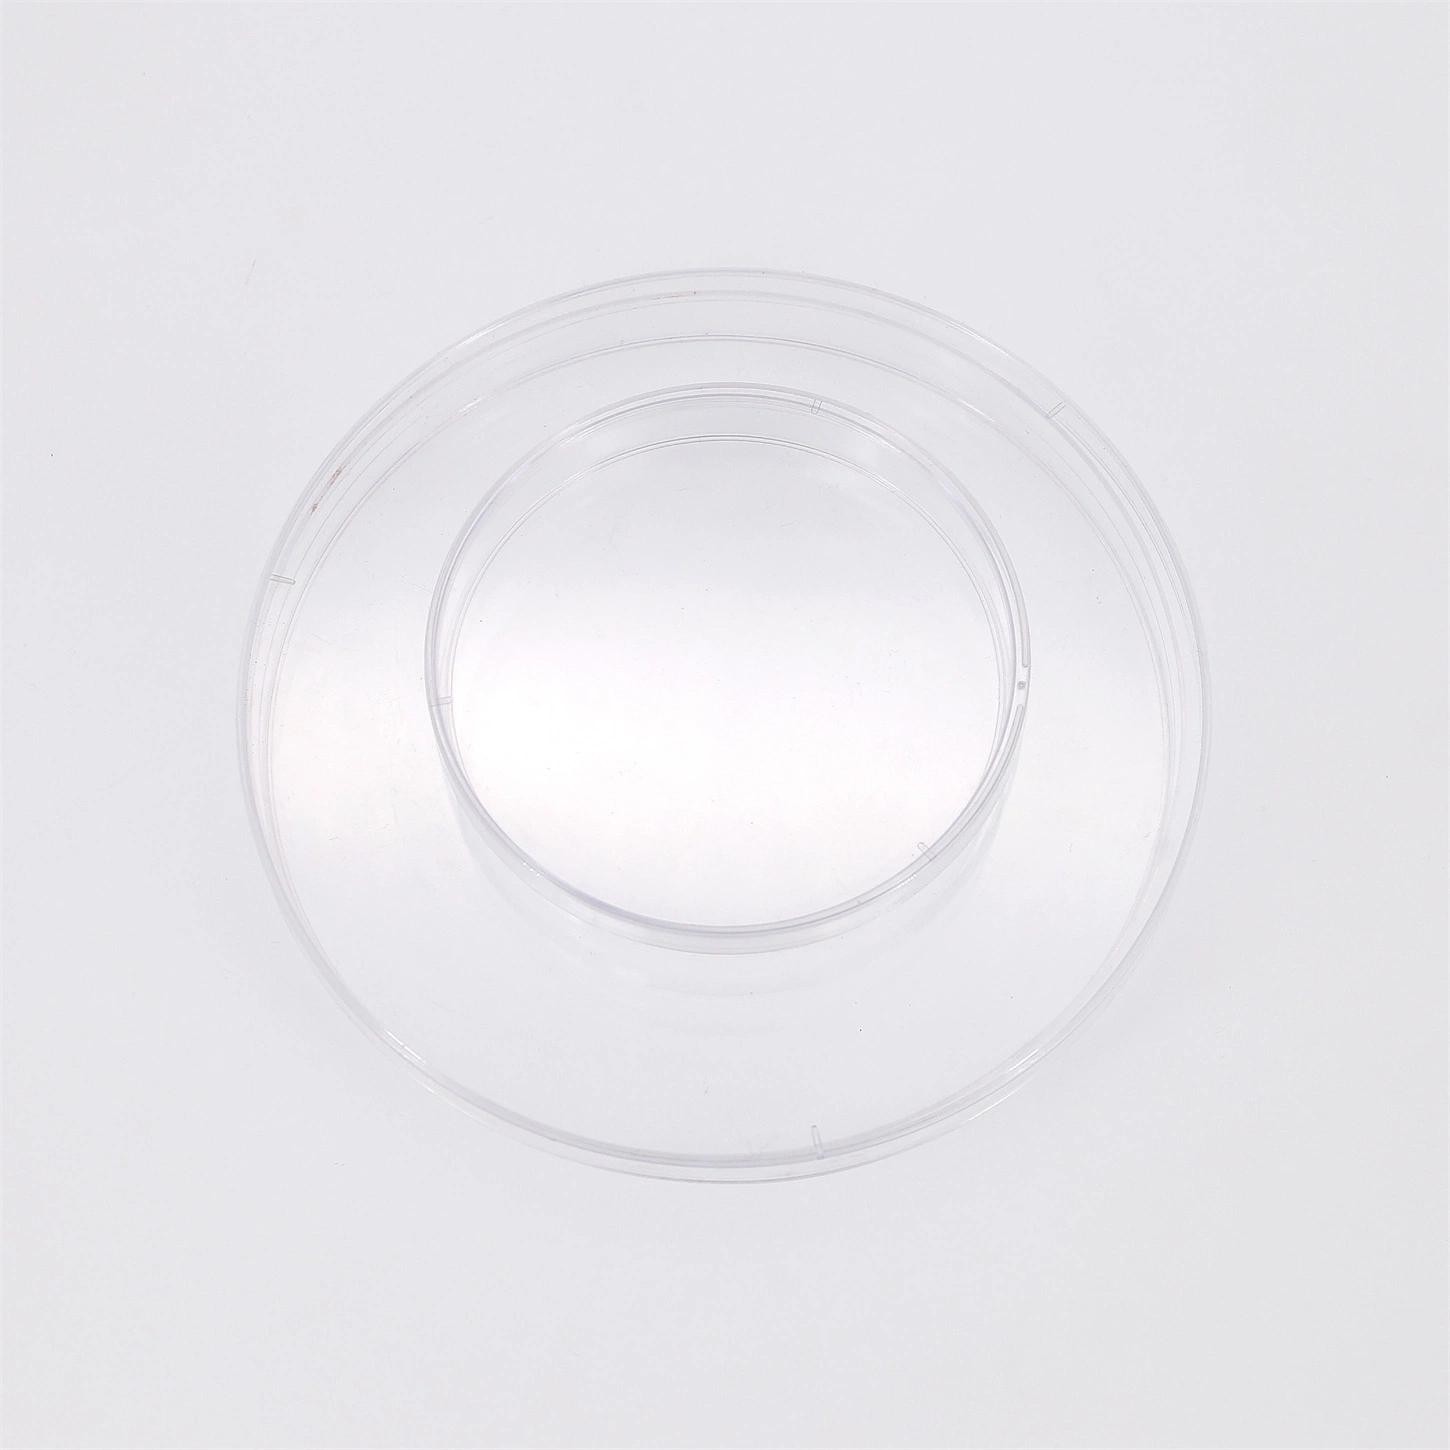 Laboratory Use Disposable 35mm/ 60mm/ 70mm/ 90mm/ 100mm/ 120mm/ 150mm Petri Dish for Tissue Culture